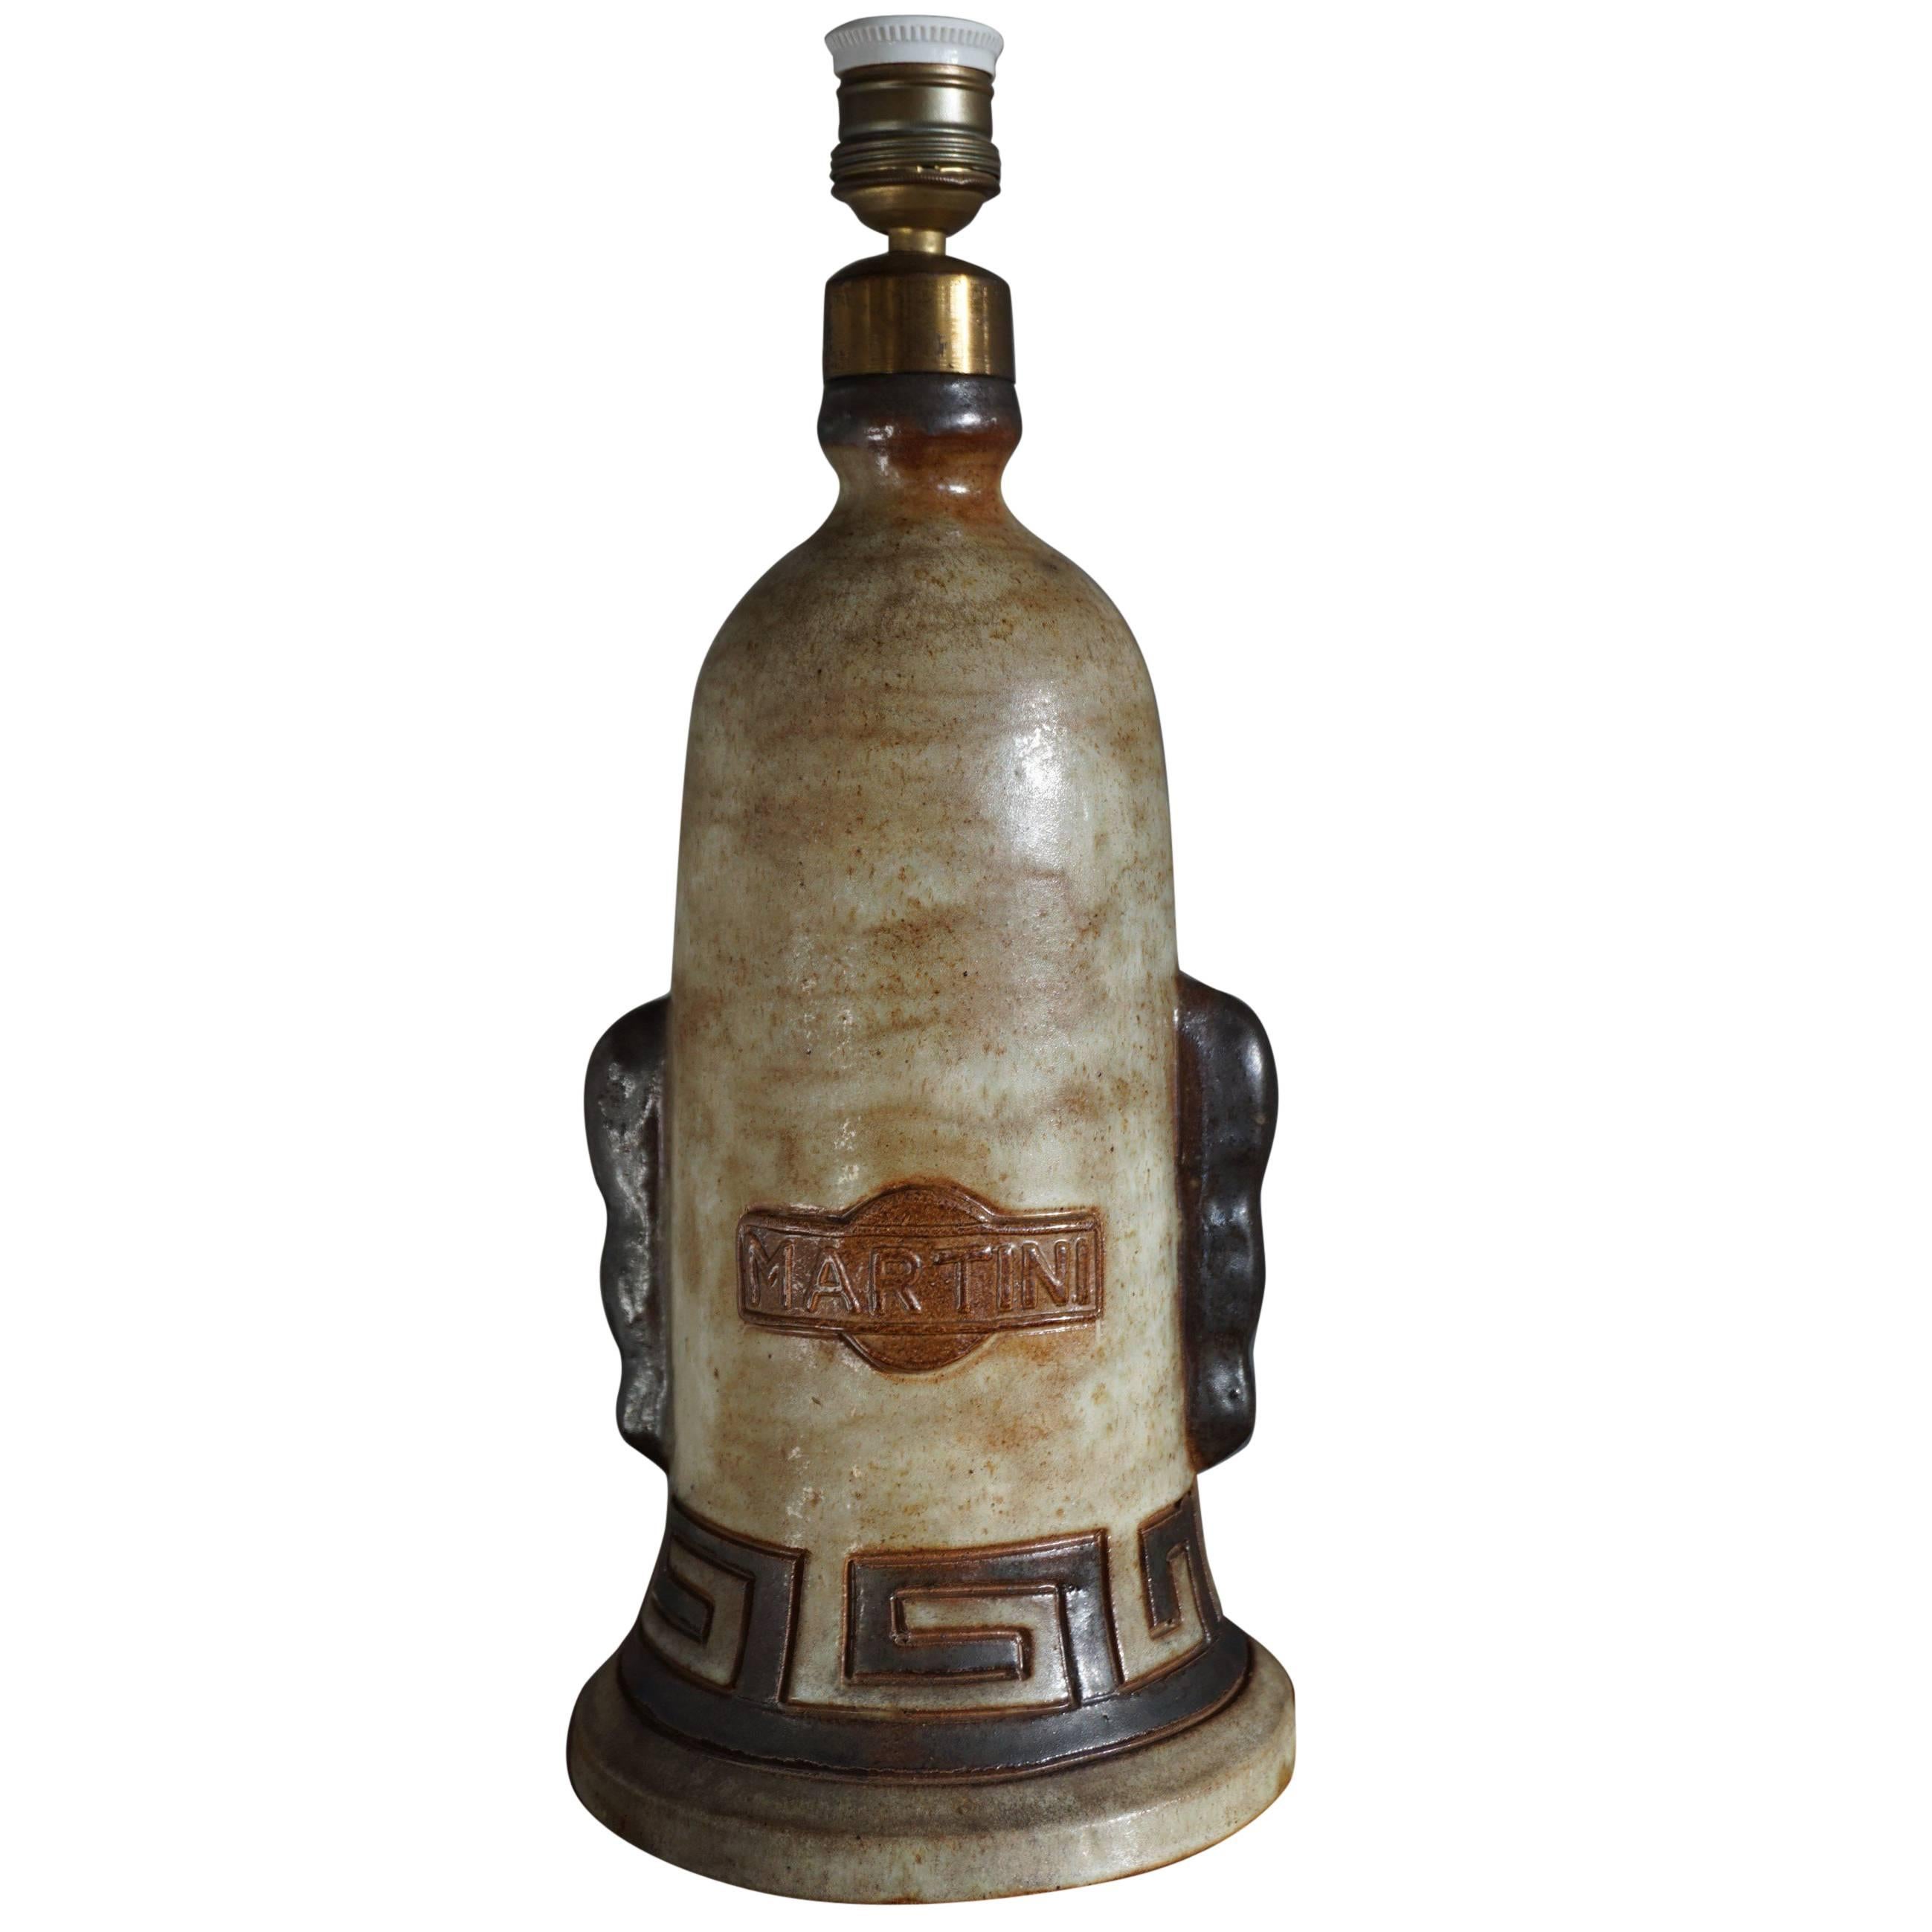 Extremely Rare & Mint Condition Ceramic / Earthenware Martini Bottle Table Lamp